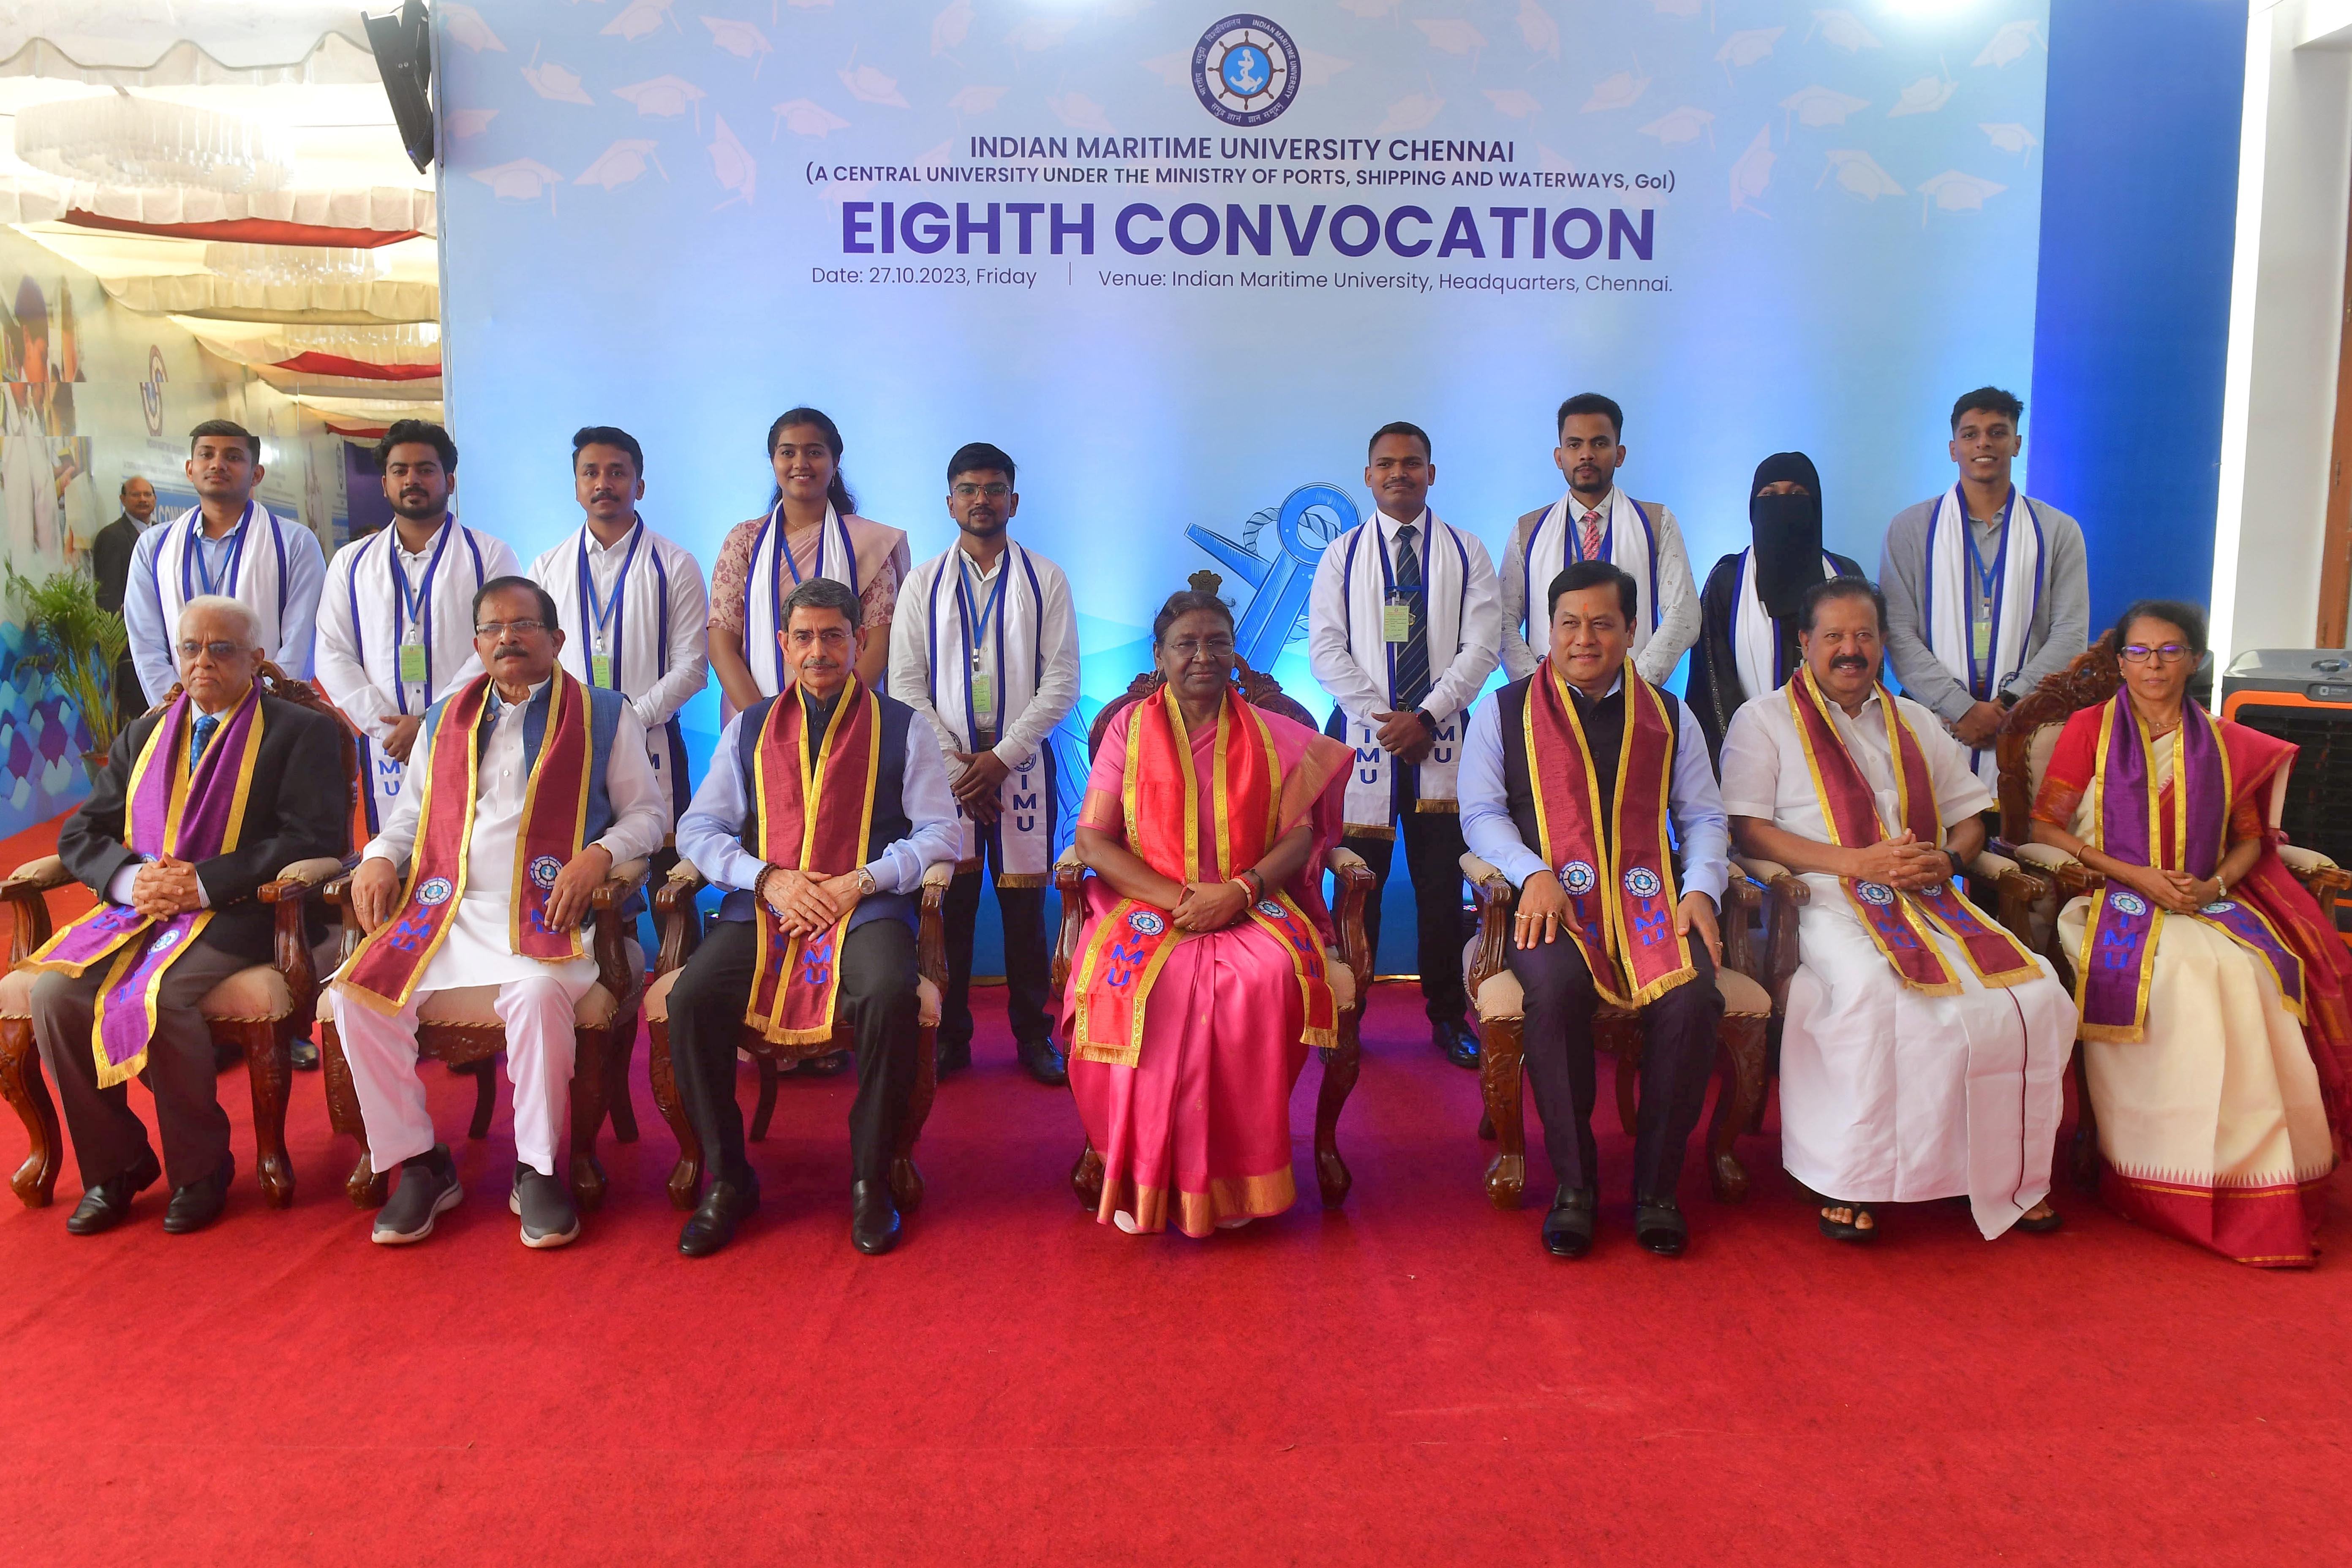 The President of India, Smt Droupadi Murmu graced and addressed the 8th convocation of Indian Maritime University at Chennai, Tamil Nadu on October 27, 2023.